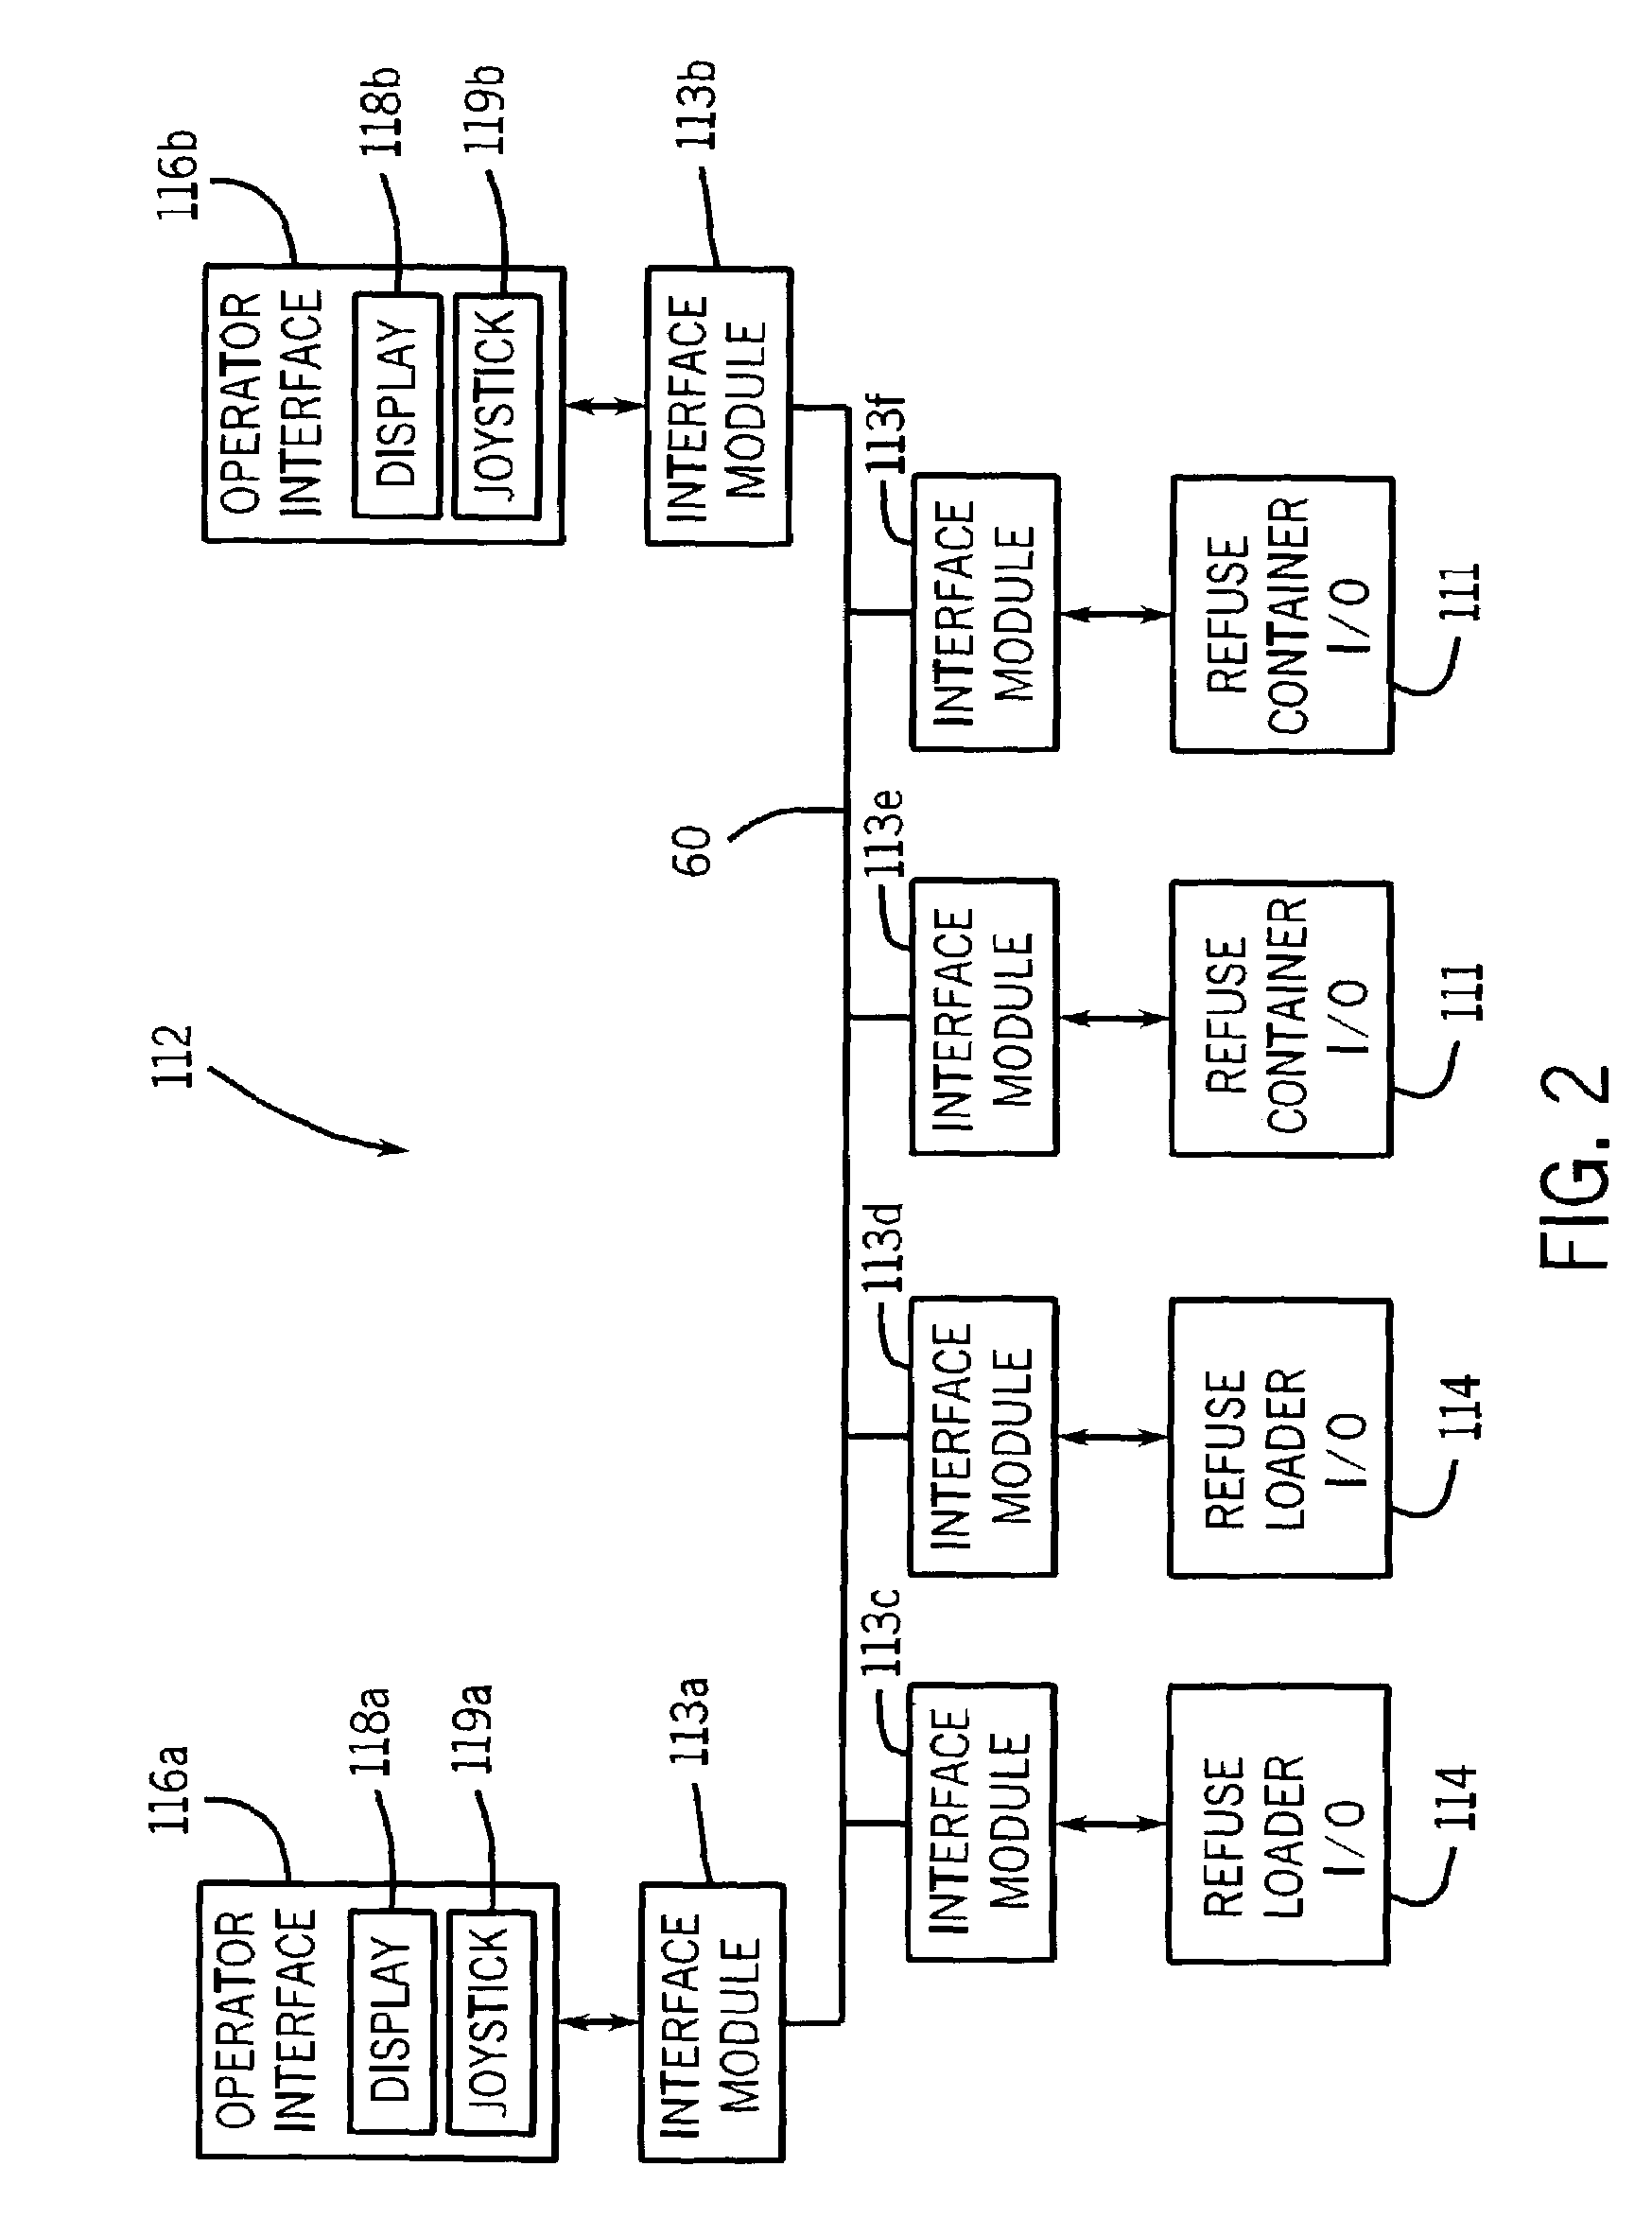 Refuse vehicle control system and method